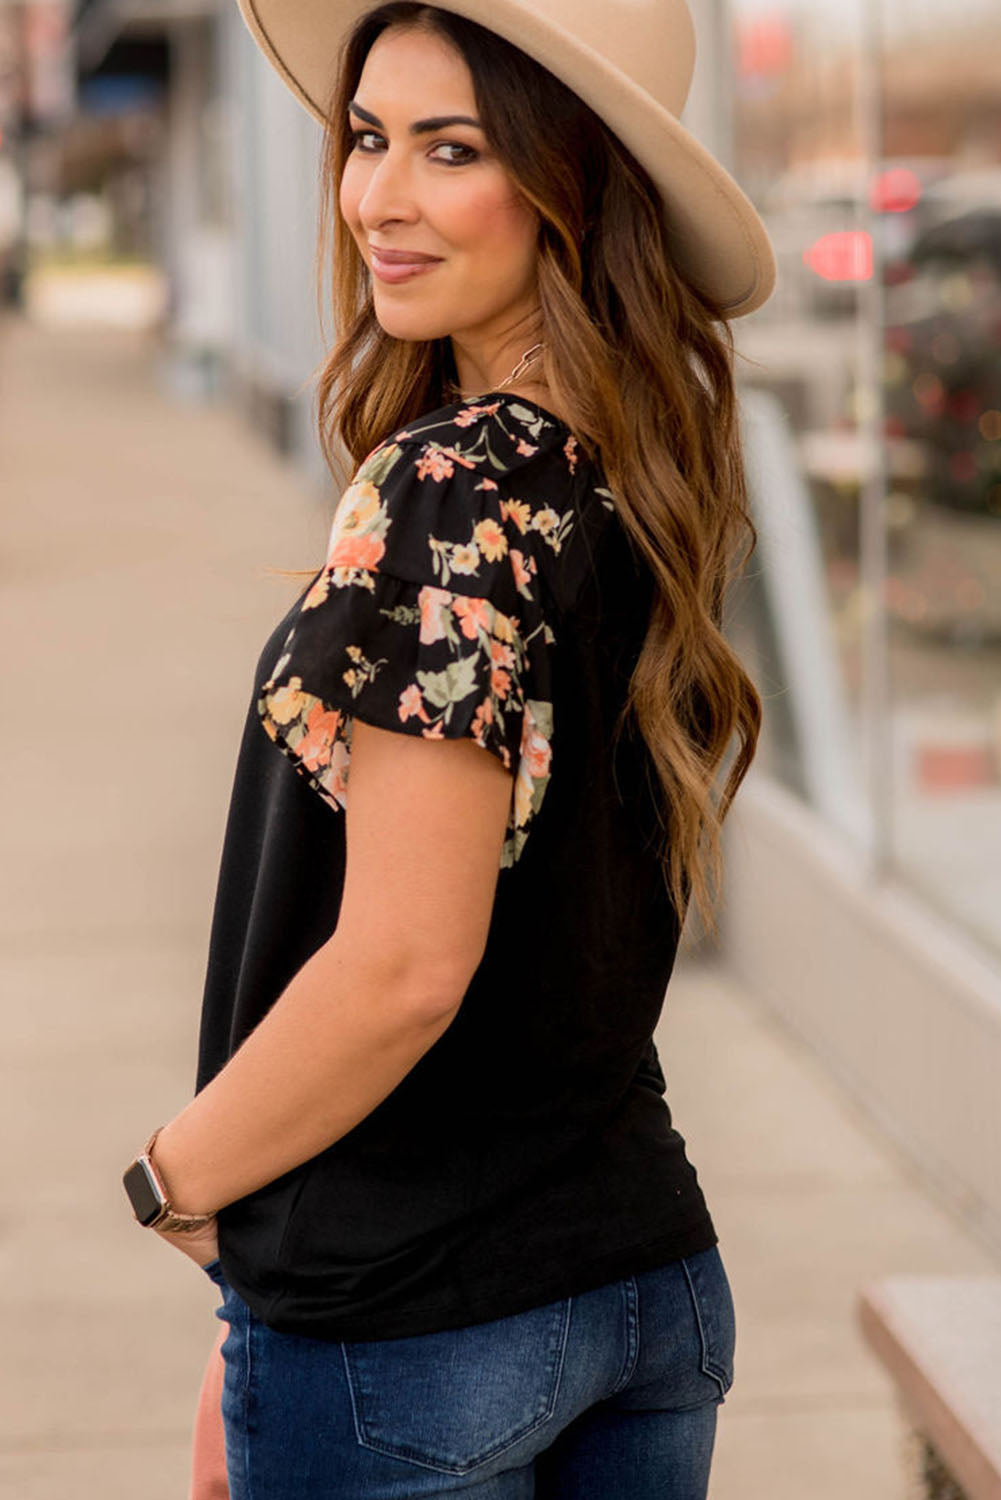 Black Floral Tiered Short Sleeve T Shirt